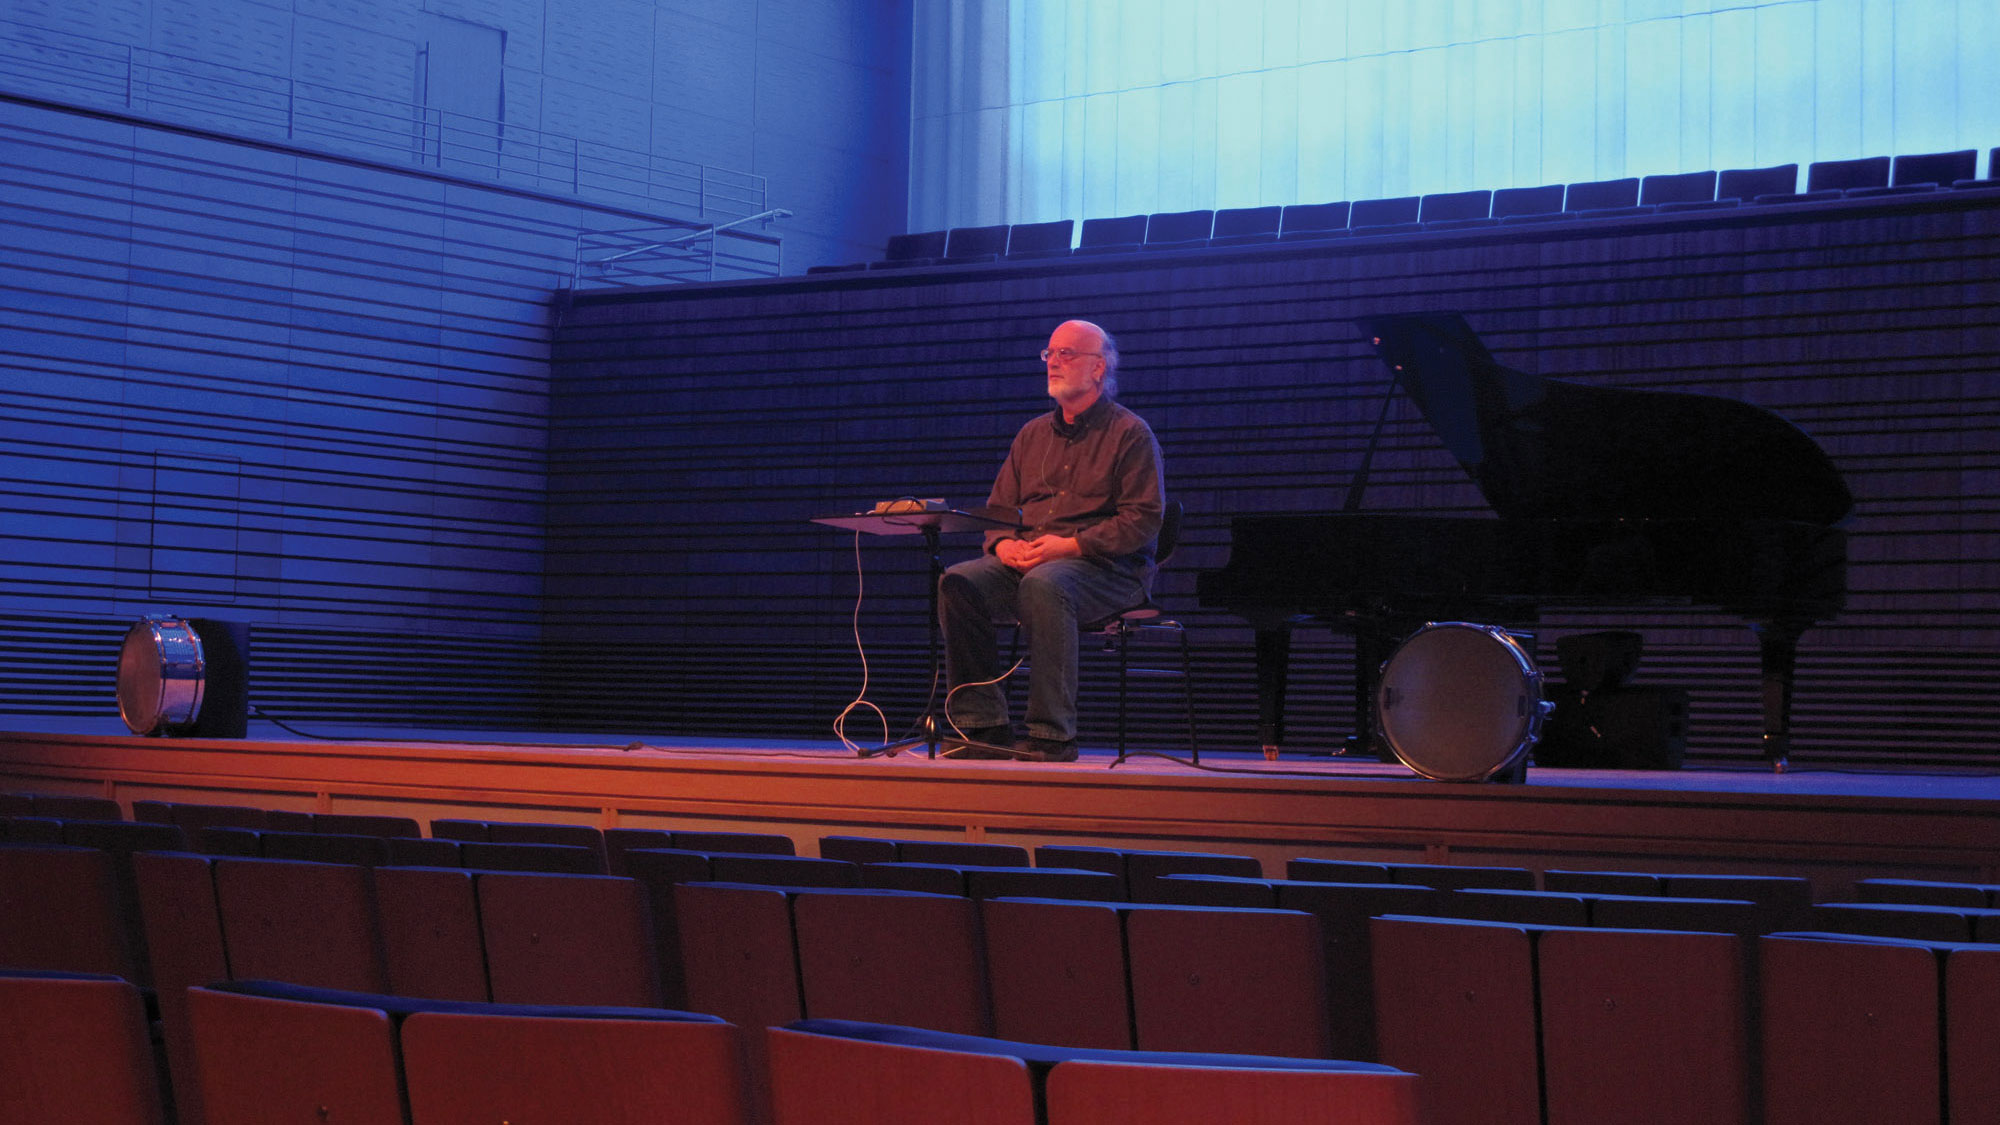 Johannes Goebel seated on the concert hall stage in blue and red light. 